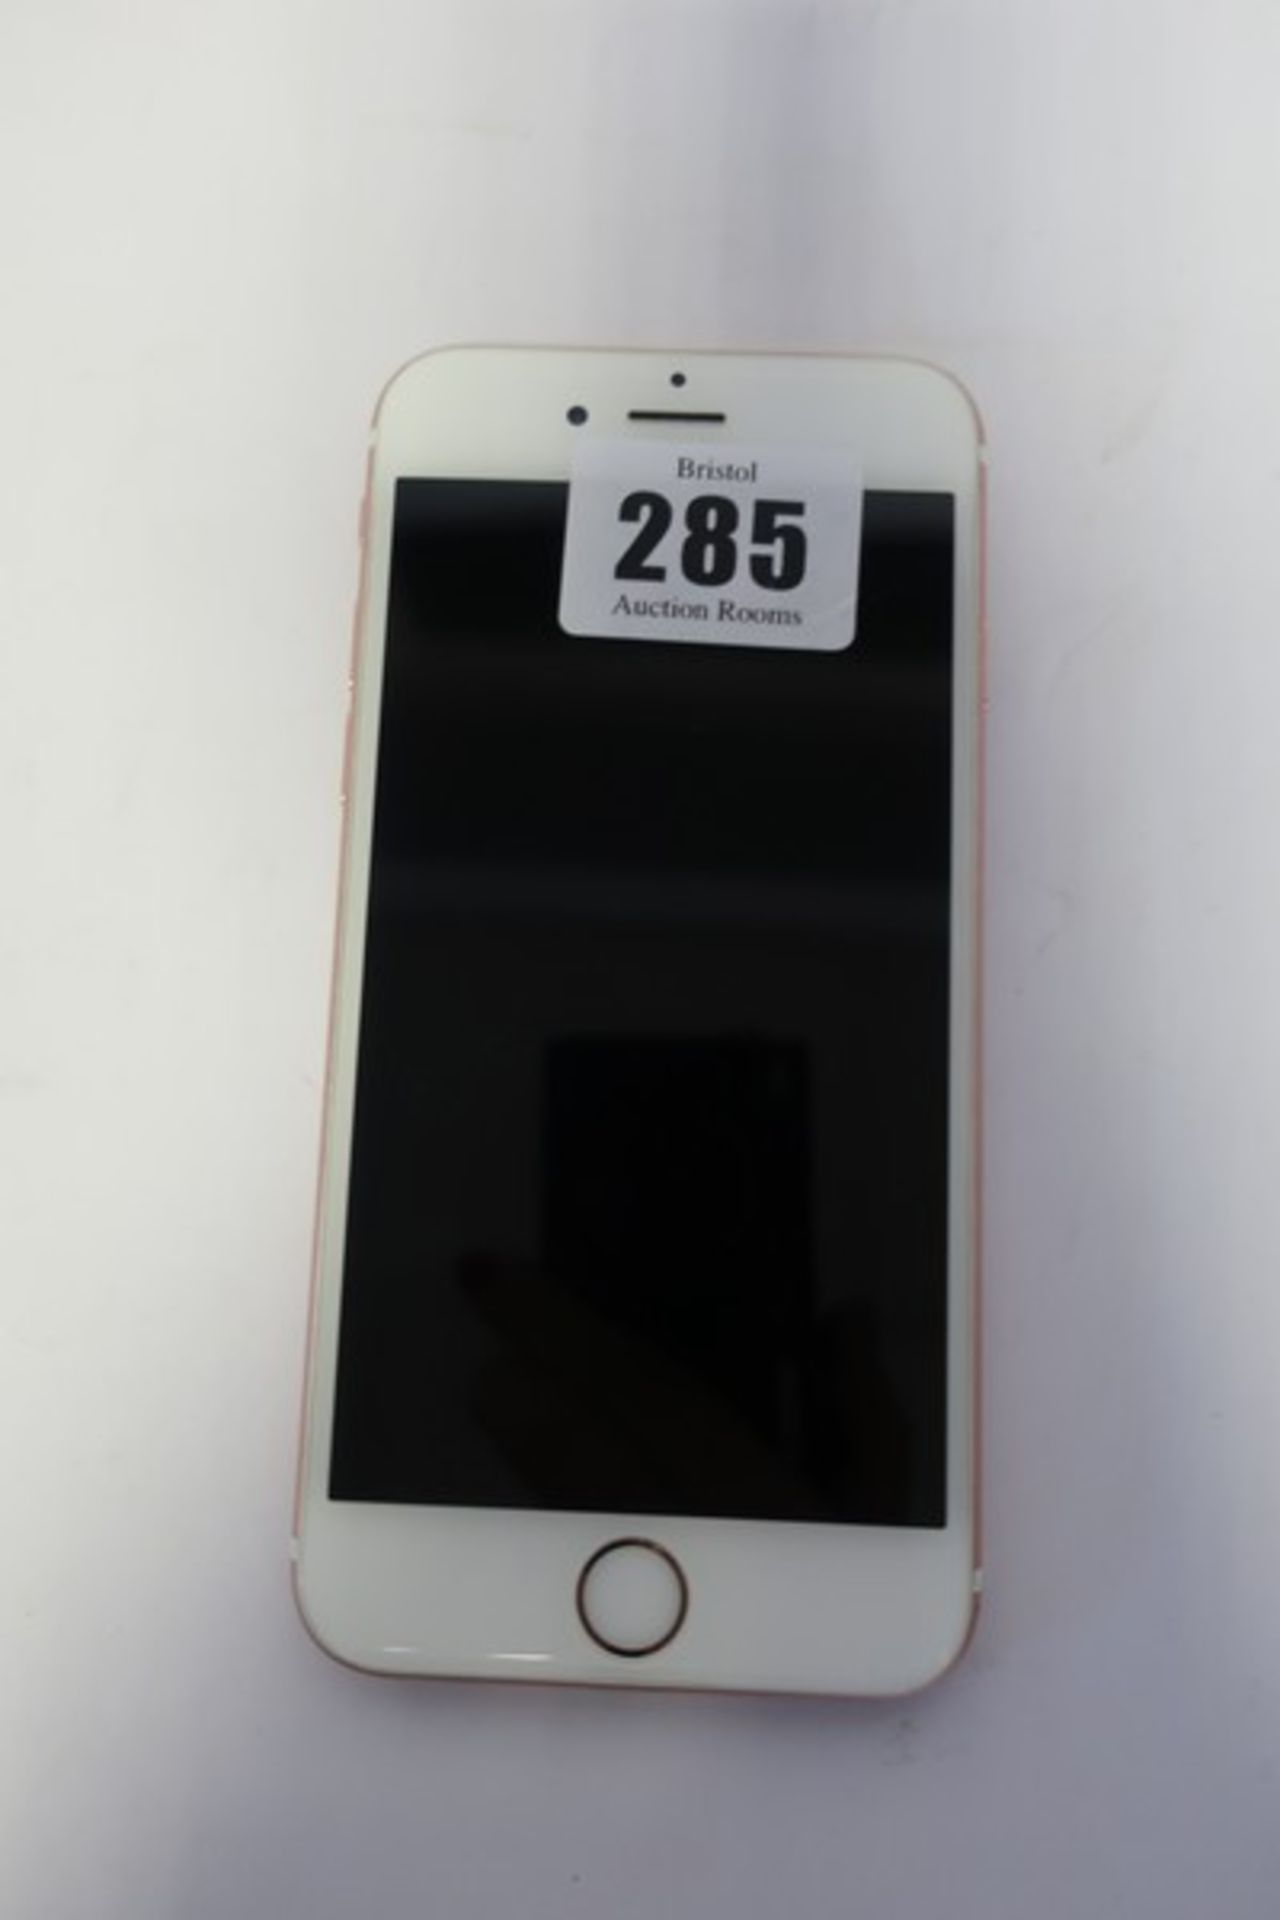 An Apple iPhone 6s (Global/A1688) 32GB in Rose Gold (IMEI: 356649082782826) (Activation clear).